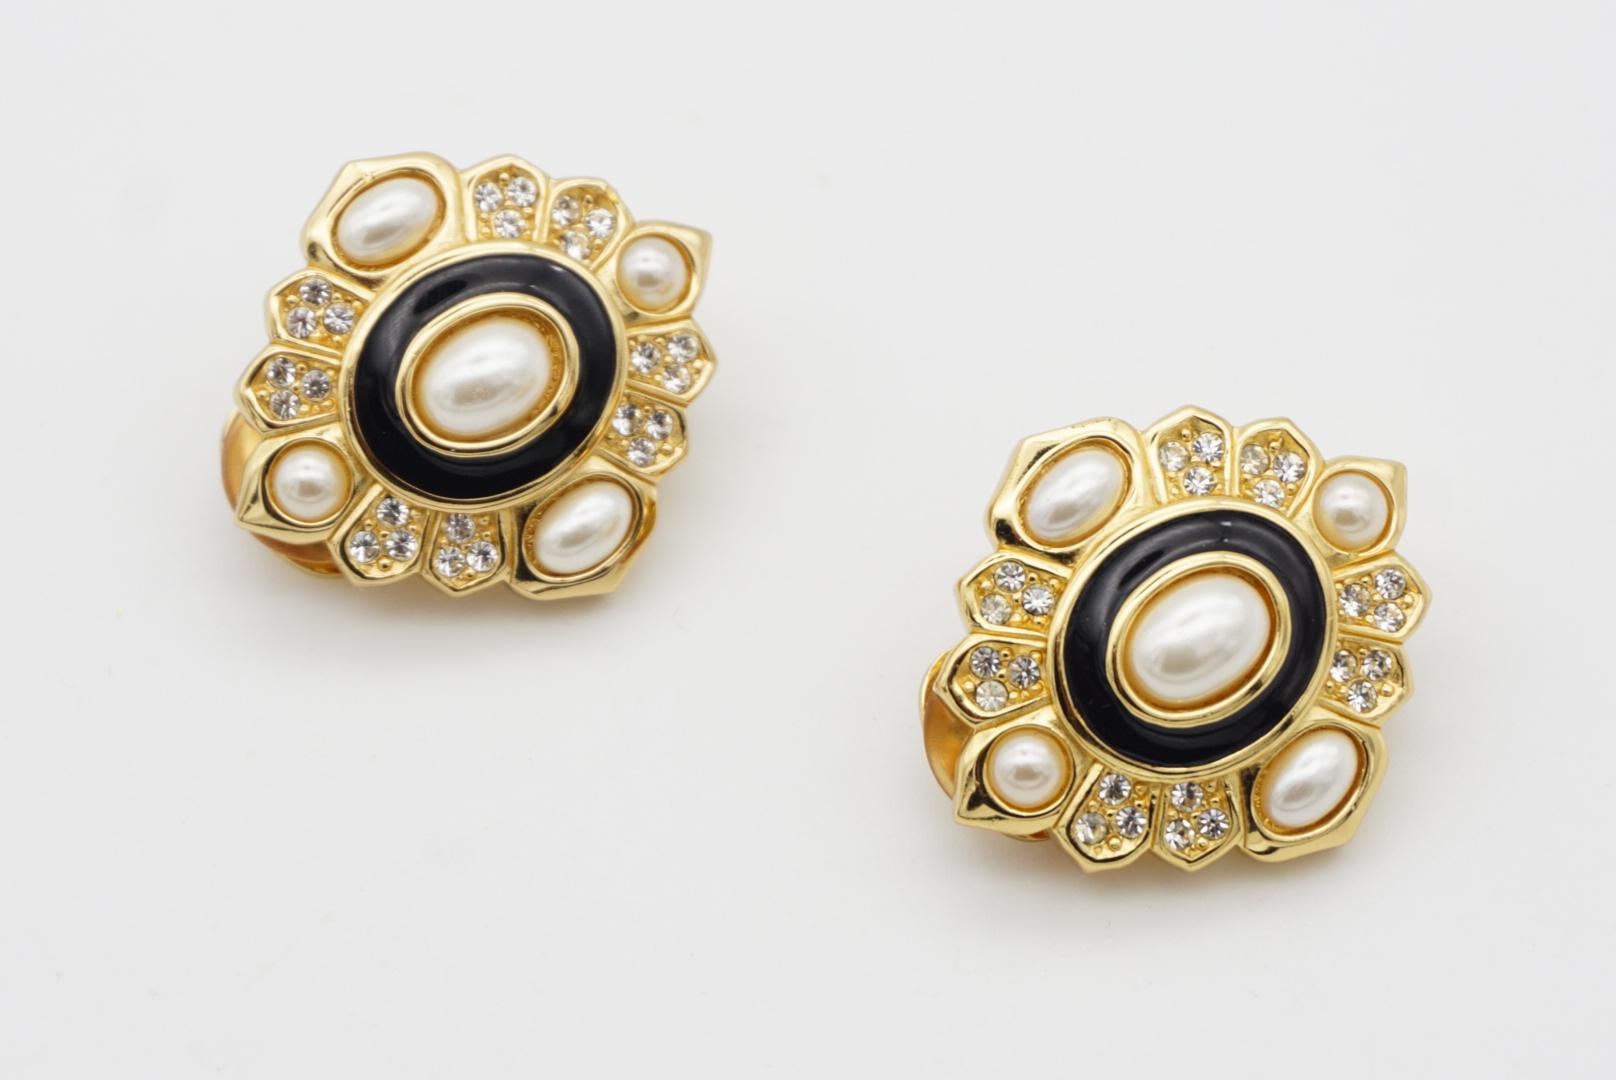 Christian Dior Vintage 1980s Oval Pearl Crystal Black Enamel Gold Clip Earrings For Sale 2